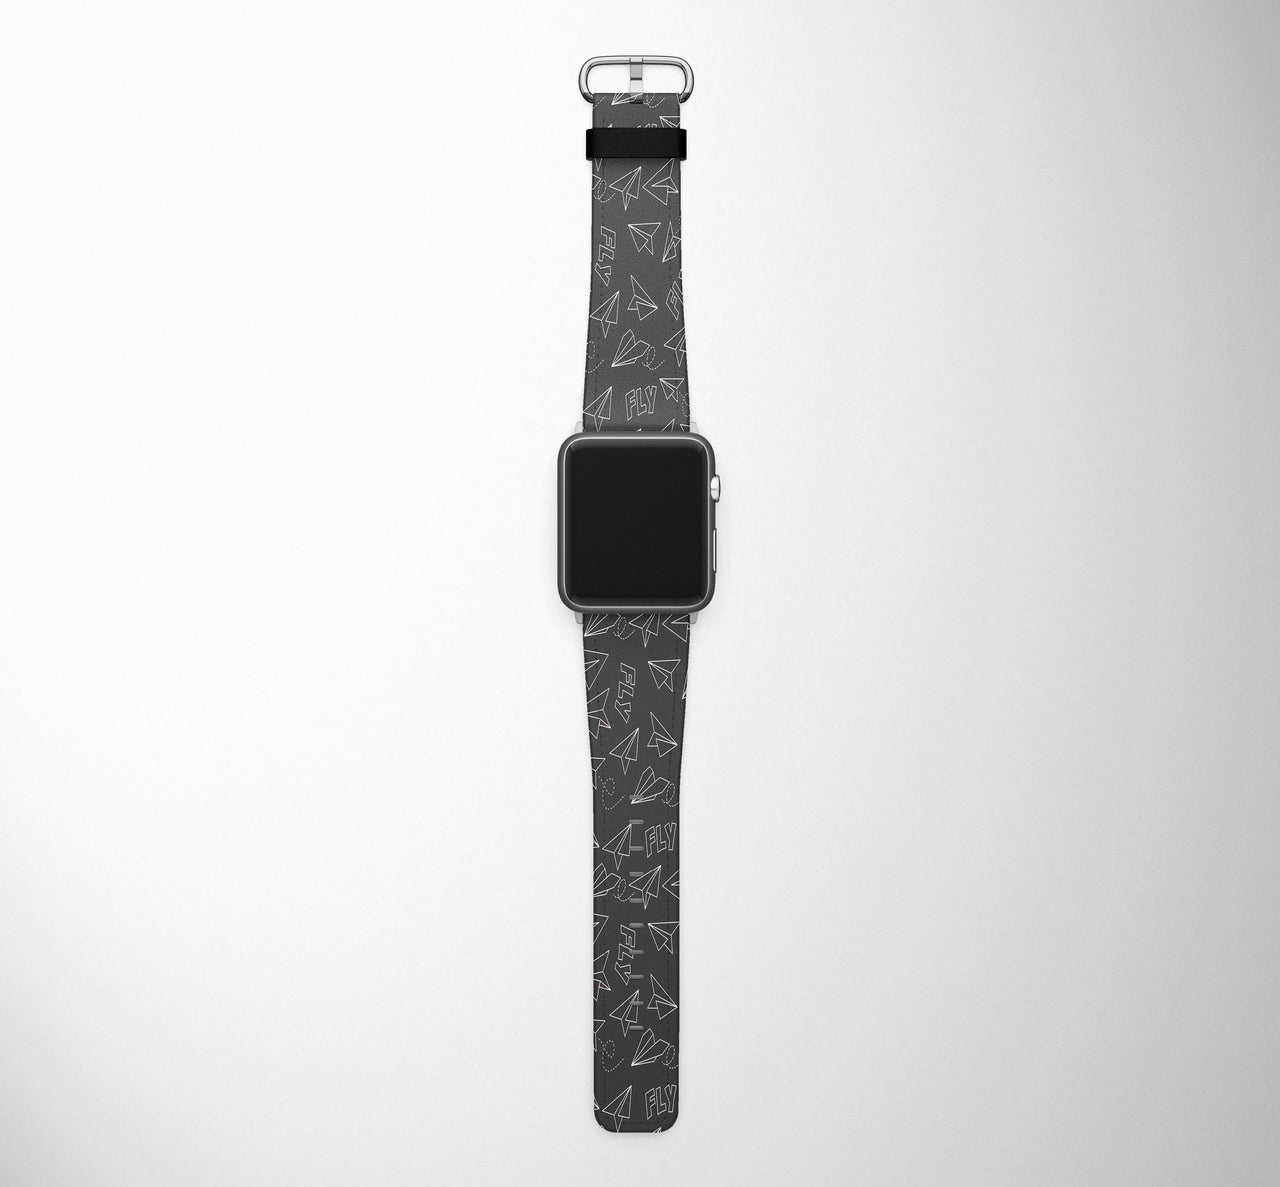 Paper Airplane & Fly (Gray) Designed Leather Apple Watch Straps